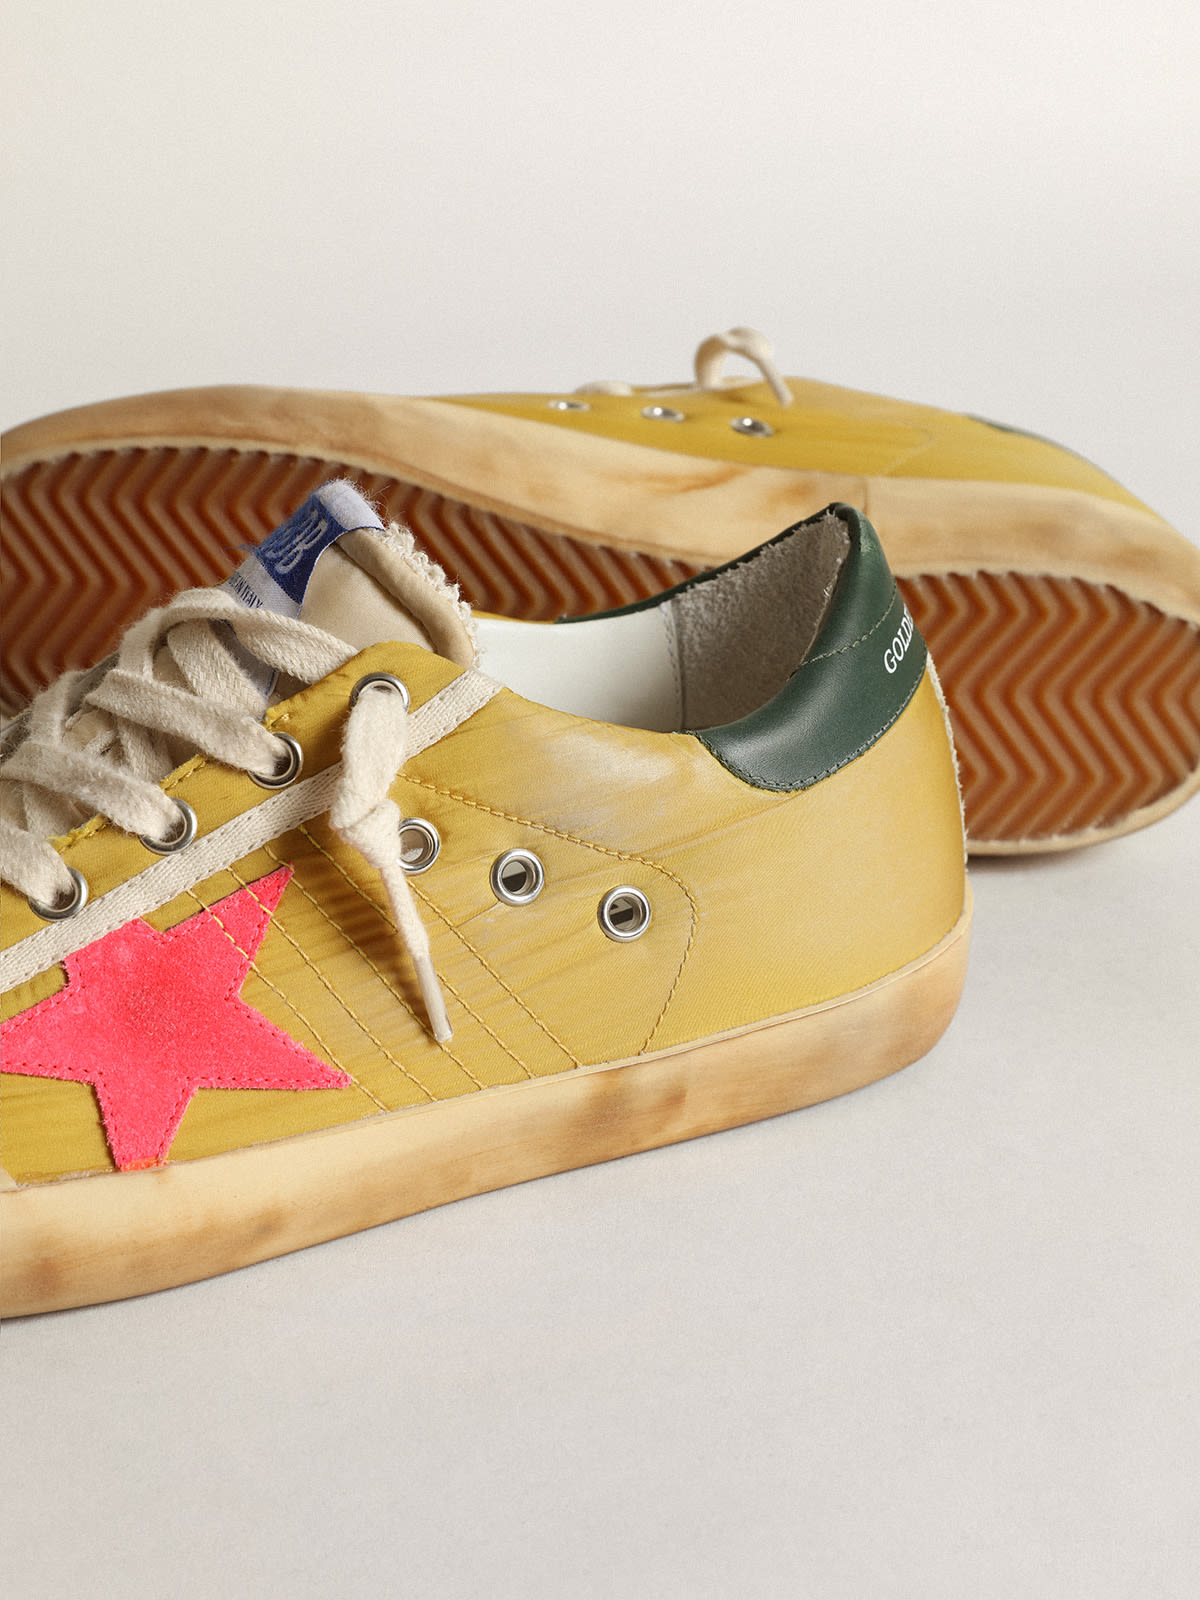 Golden Goose - Super-Star Penstar sneakers in mustard-colored nylon with fluorescent lobster-colored suede star in 